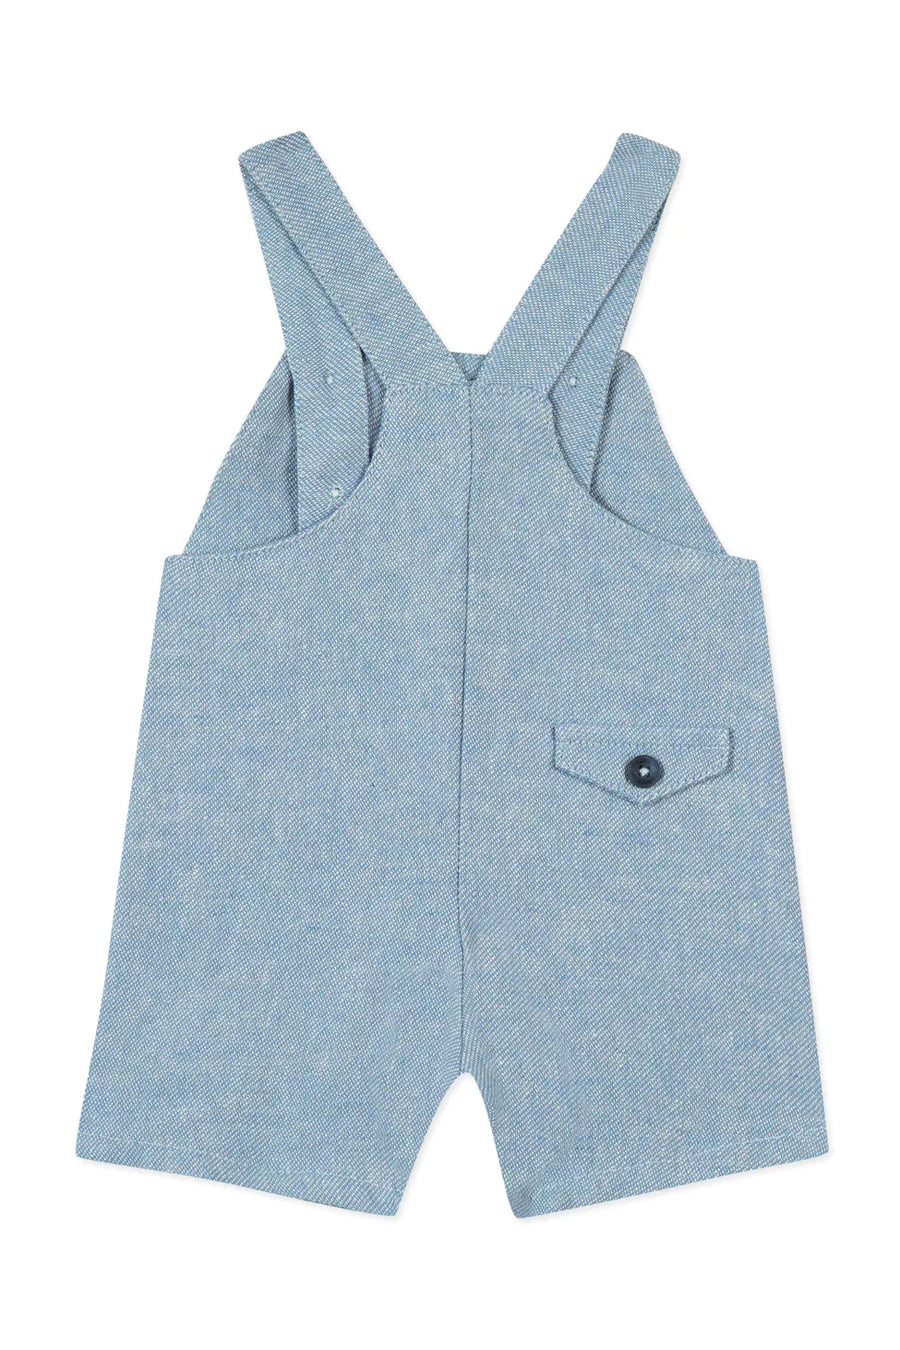 Blue Chambray Overall